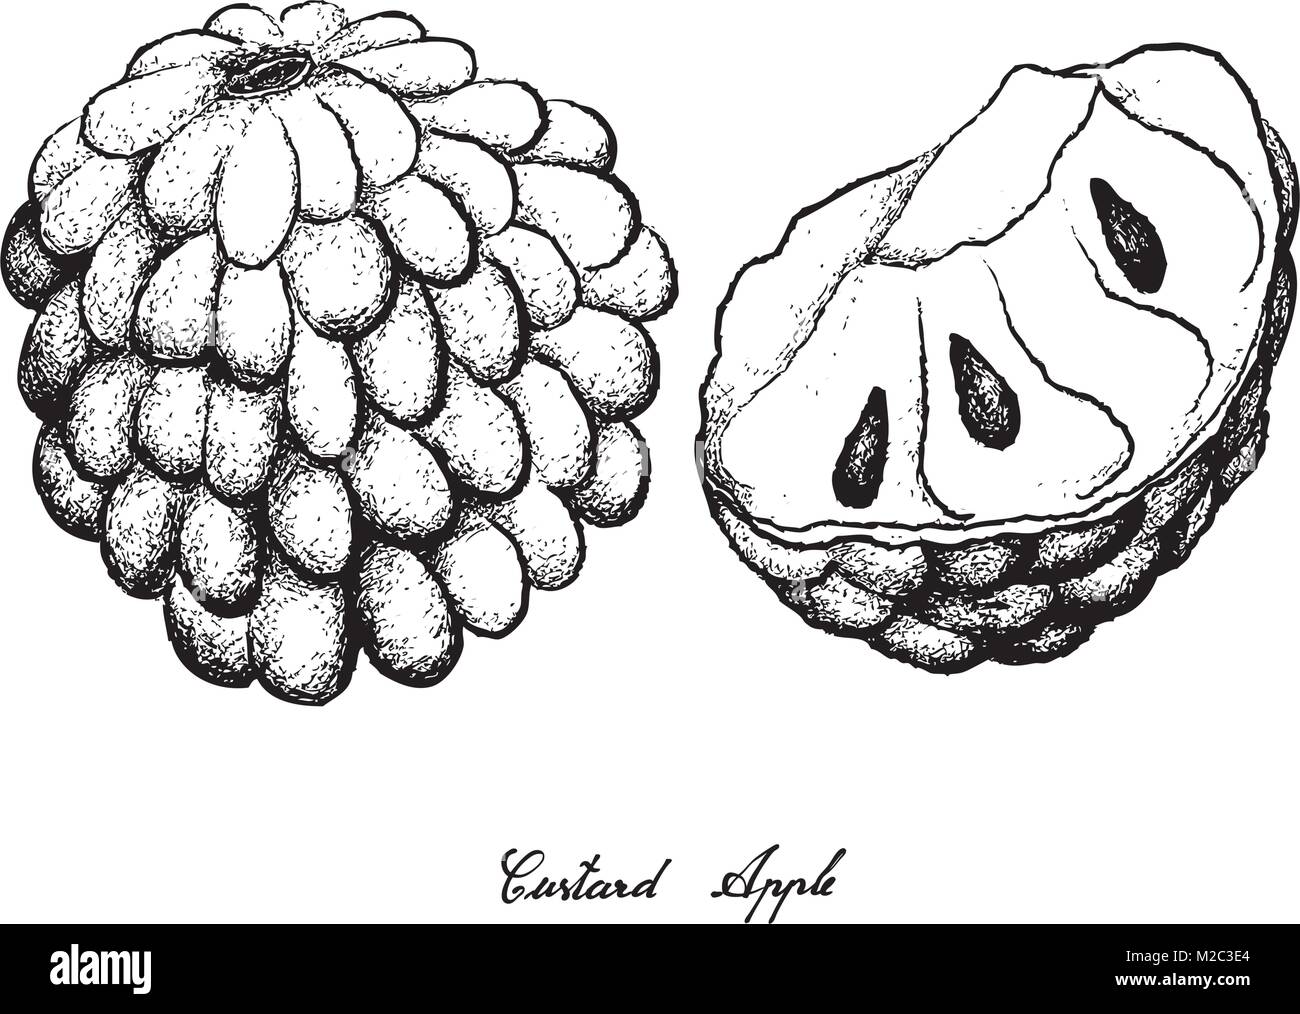 Tropical Fruit, Illustration Hand Drawn Sketch of Custard Apple and Annona Reticulata Fruit Isolated on White Background. Stock Vector